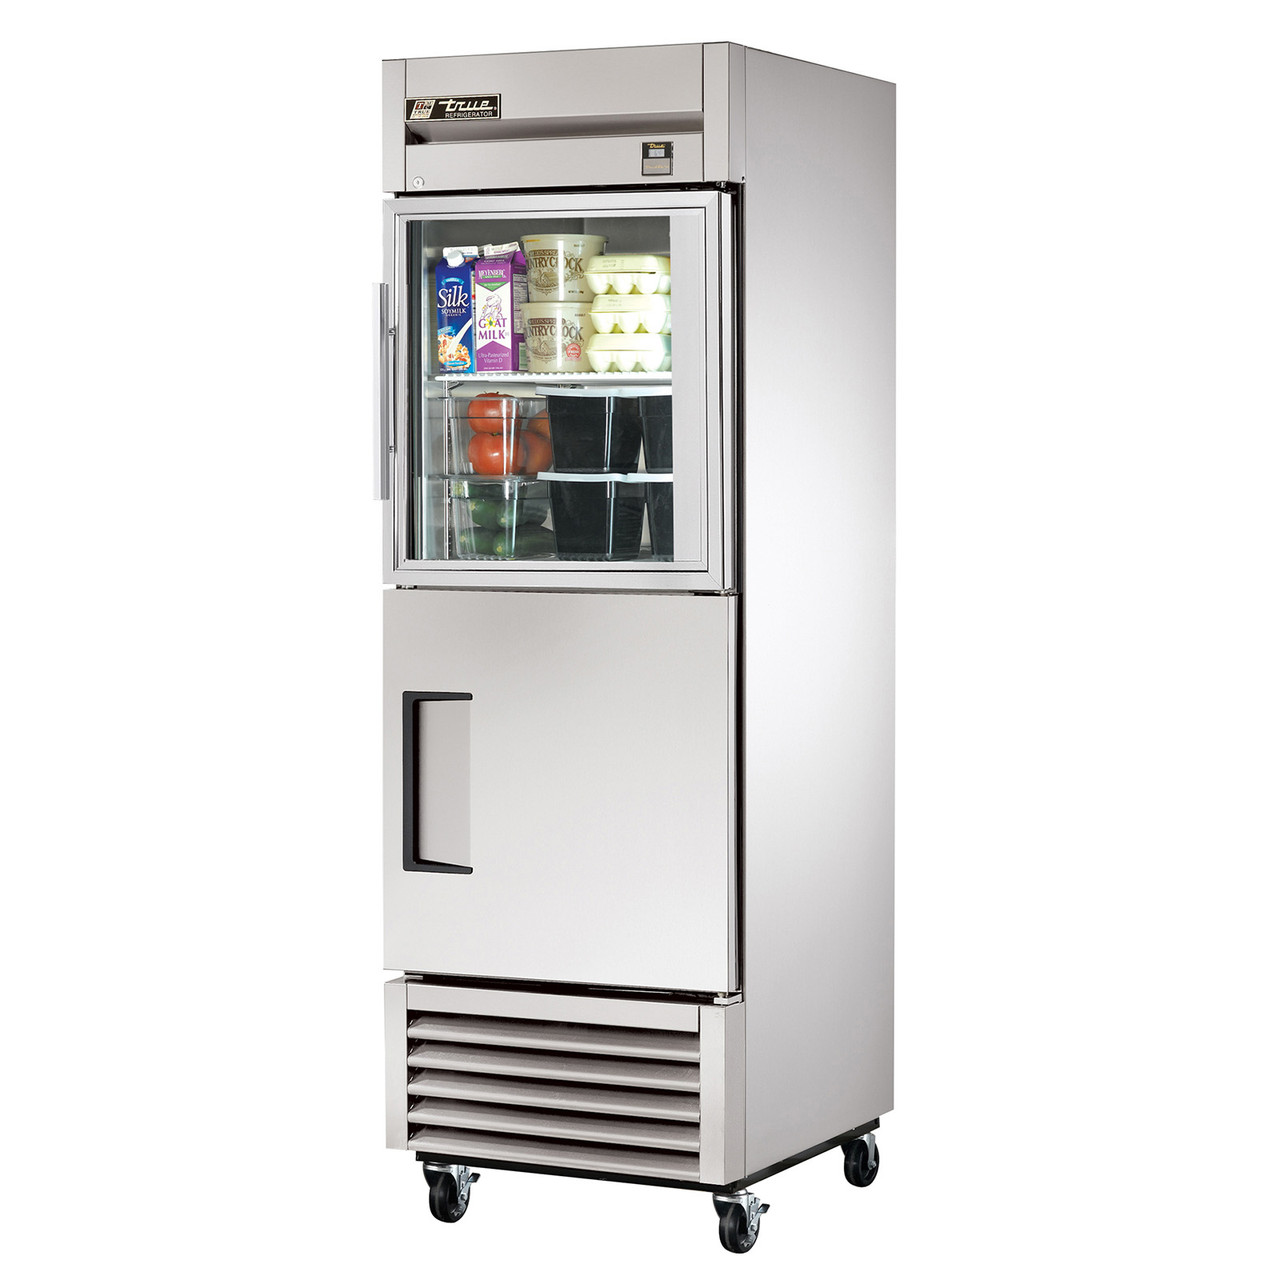 True Manufacturing TS-23-1-G-1-HC~FGD01 1 Section Refrigerator - 2 Half Doors - Glass/ Solid - All Stainless